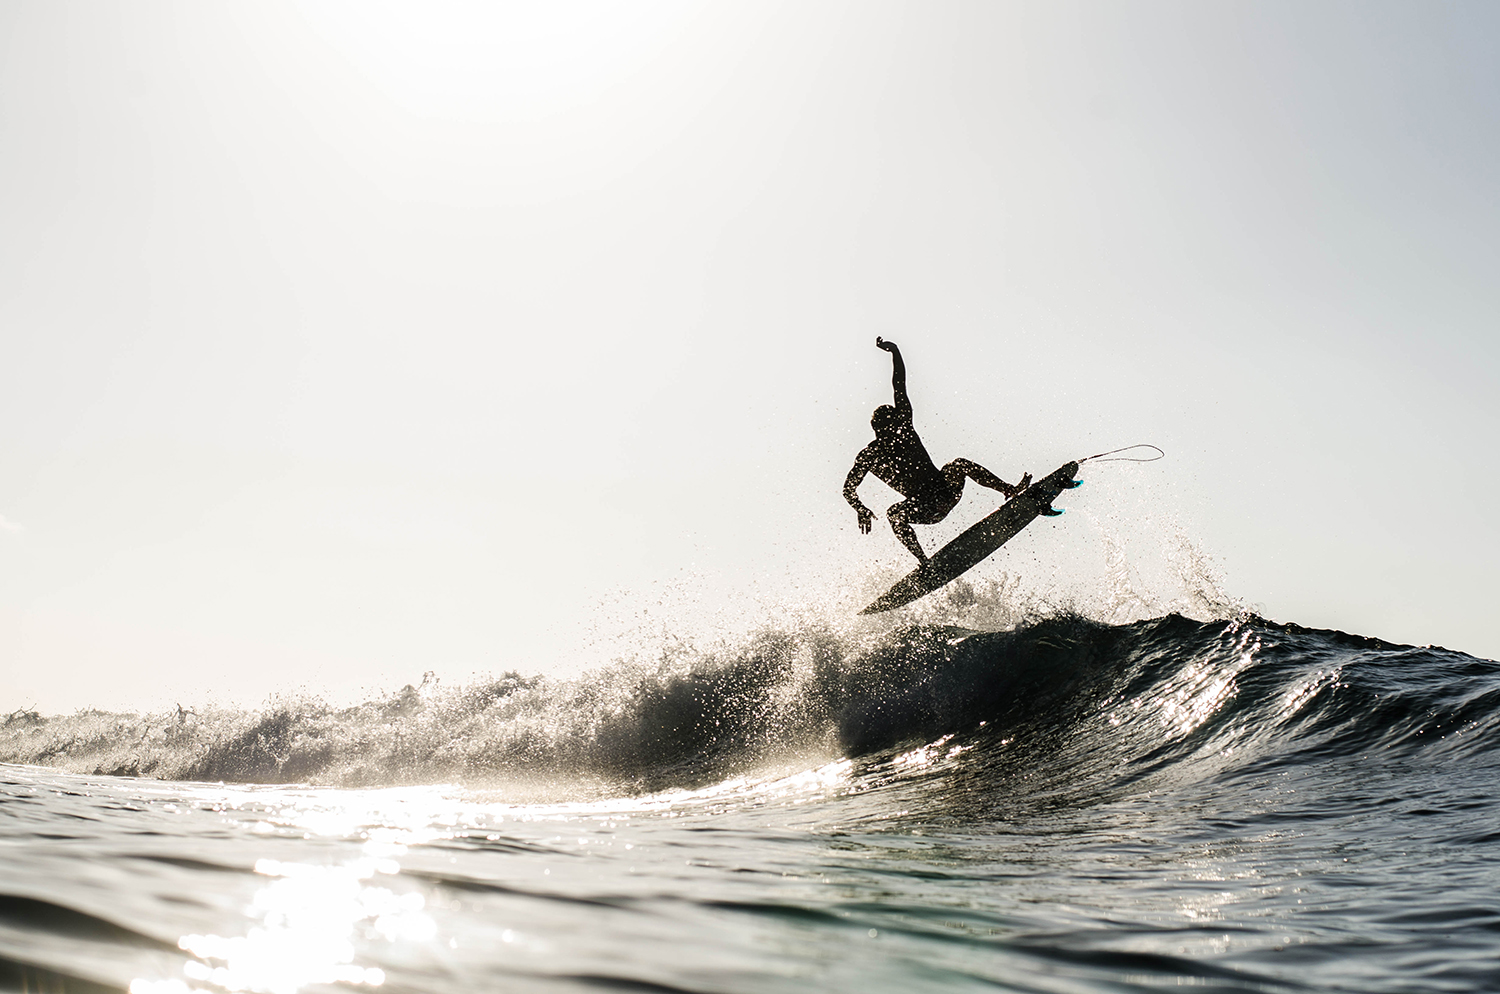 Scientists Probe How Surfing Could Help Chronic Pain